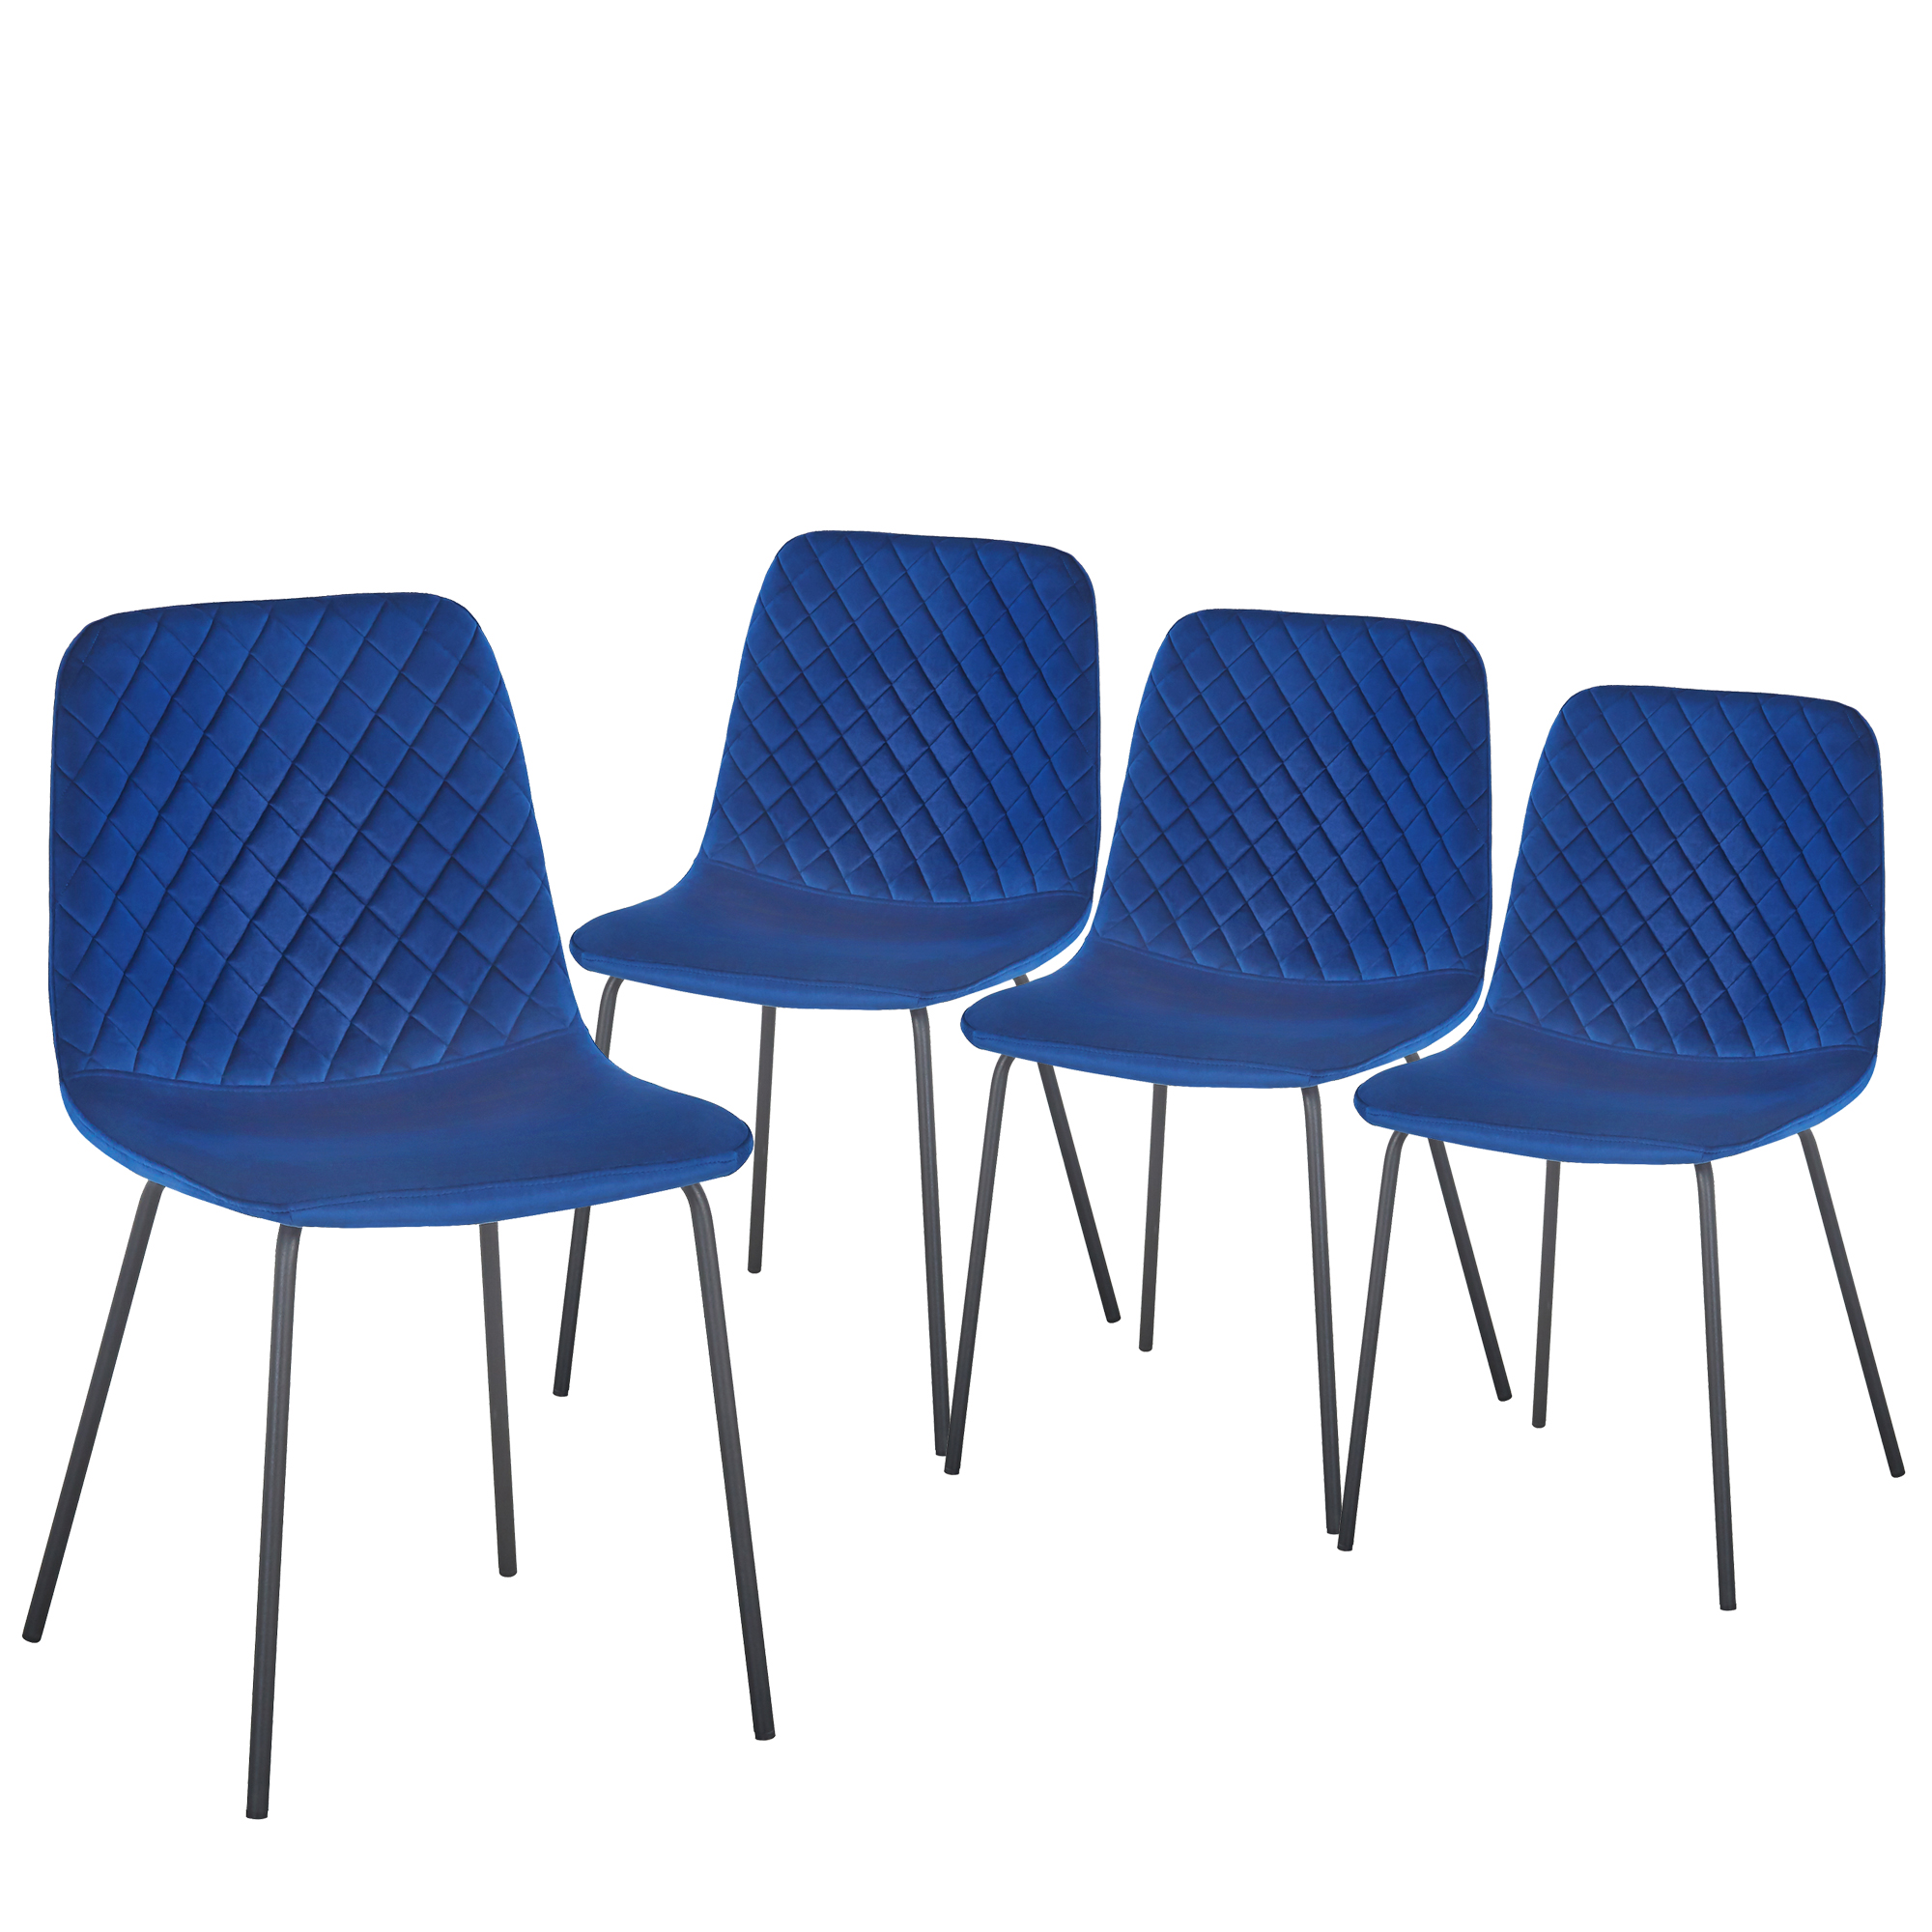 Dining Chair set of 4 PCS（BLUE），Modern style，New technology，Suitable for restaurants, cafes, taverns, offices, living rooms, reception rooms.Simple structure, easy installation.-CASAINC